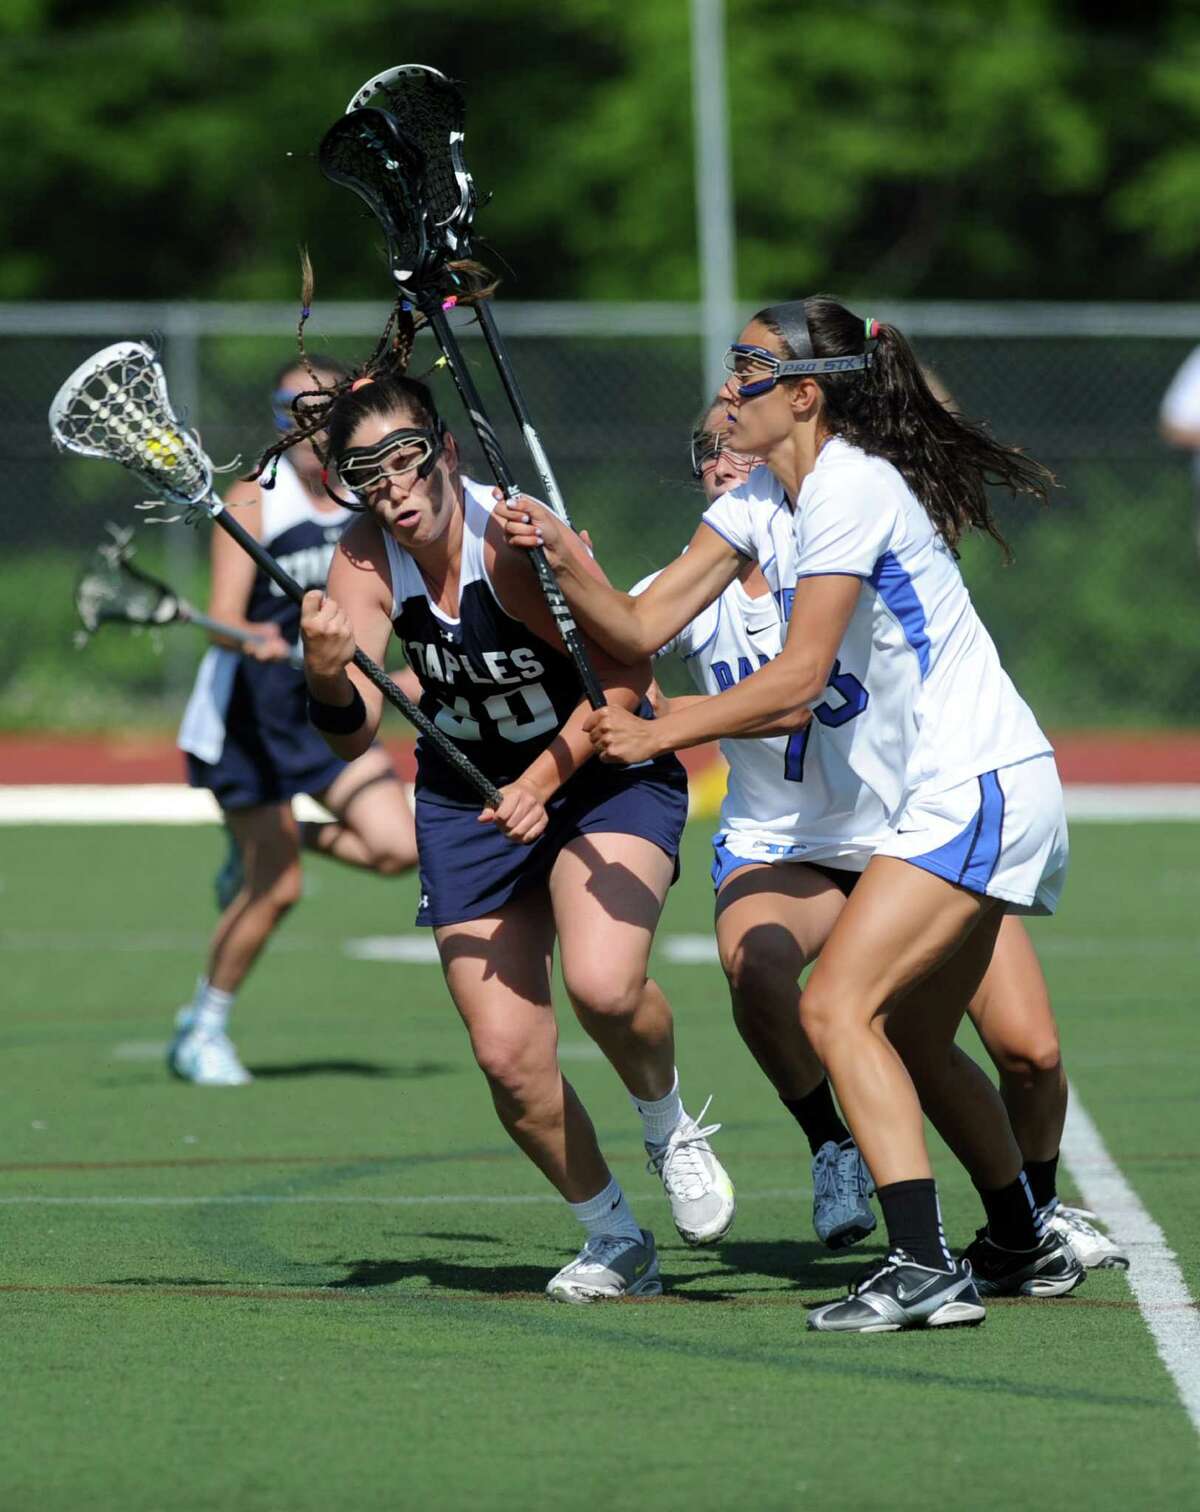 Staples' Remy Nolan controls the ball during Friday's FCIAC quarterfinal game at Darien High School on May 18, 2012.